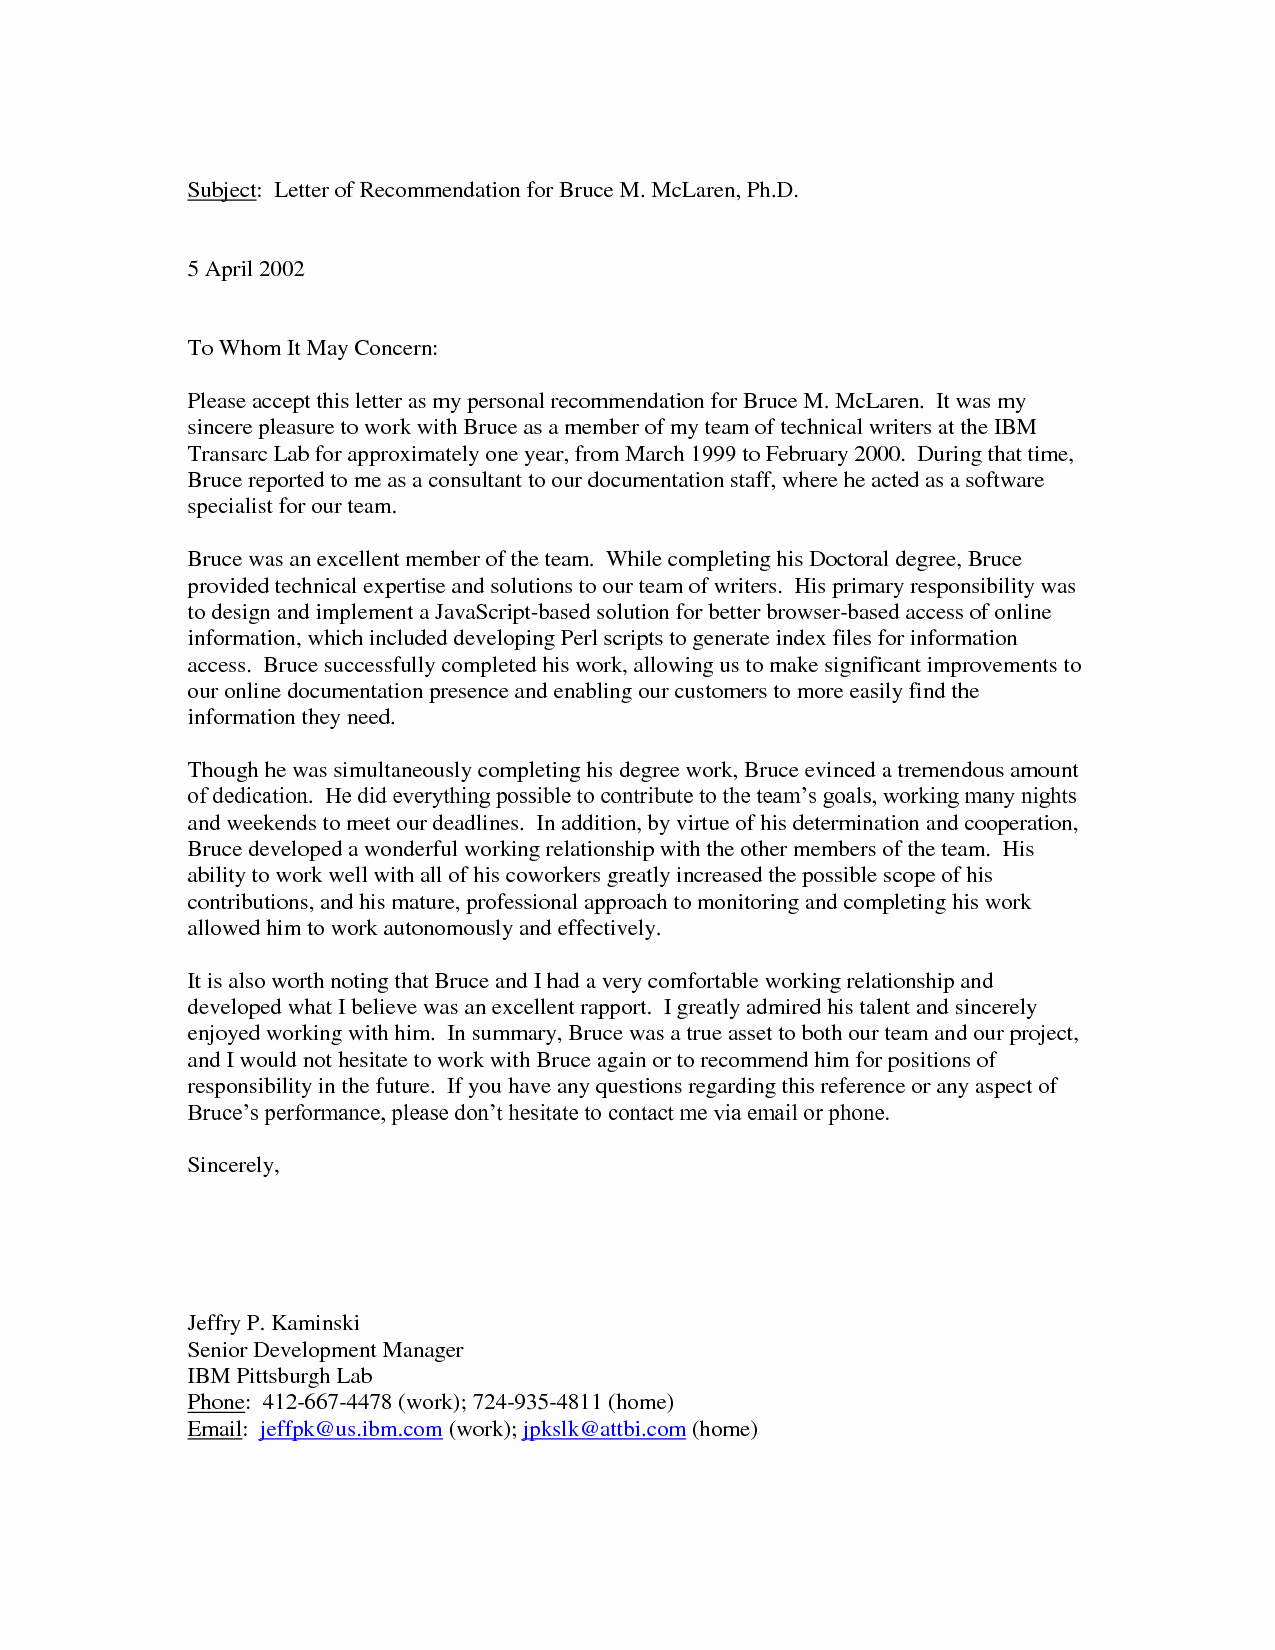 Personal Recommendation Letter Template Best Of Personal Letter Re Mendation